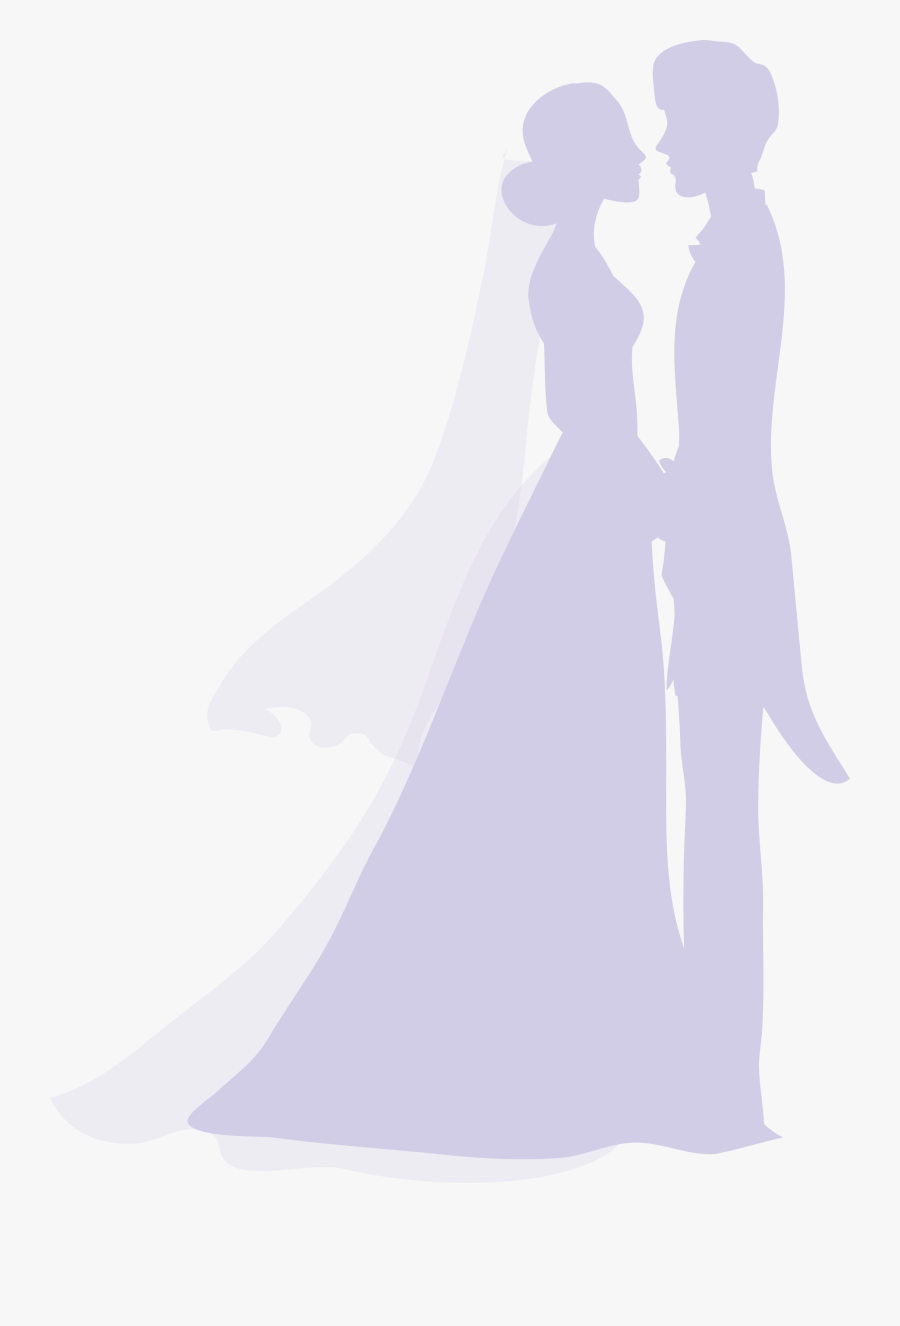 Marriage Silhouette Wedding - Illustration, Transparent Clipart